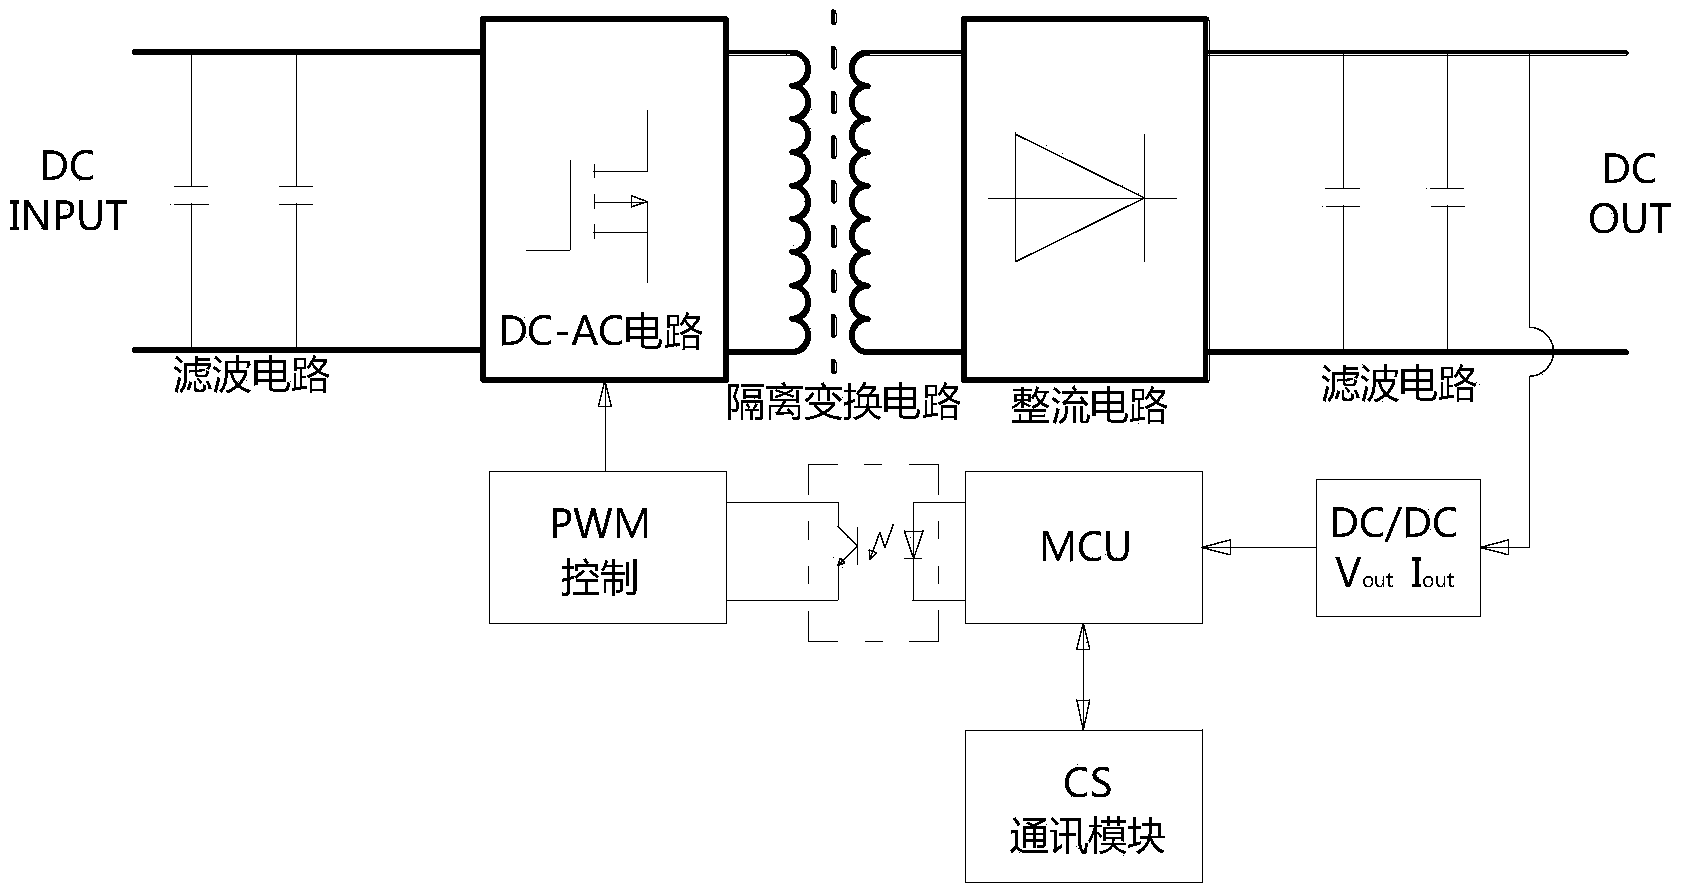 DC/DC conversion and control system used for standby power system of proton exchange membrane fuel cell